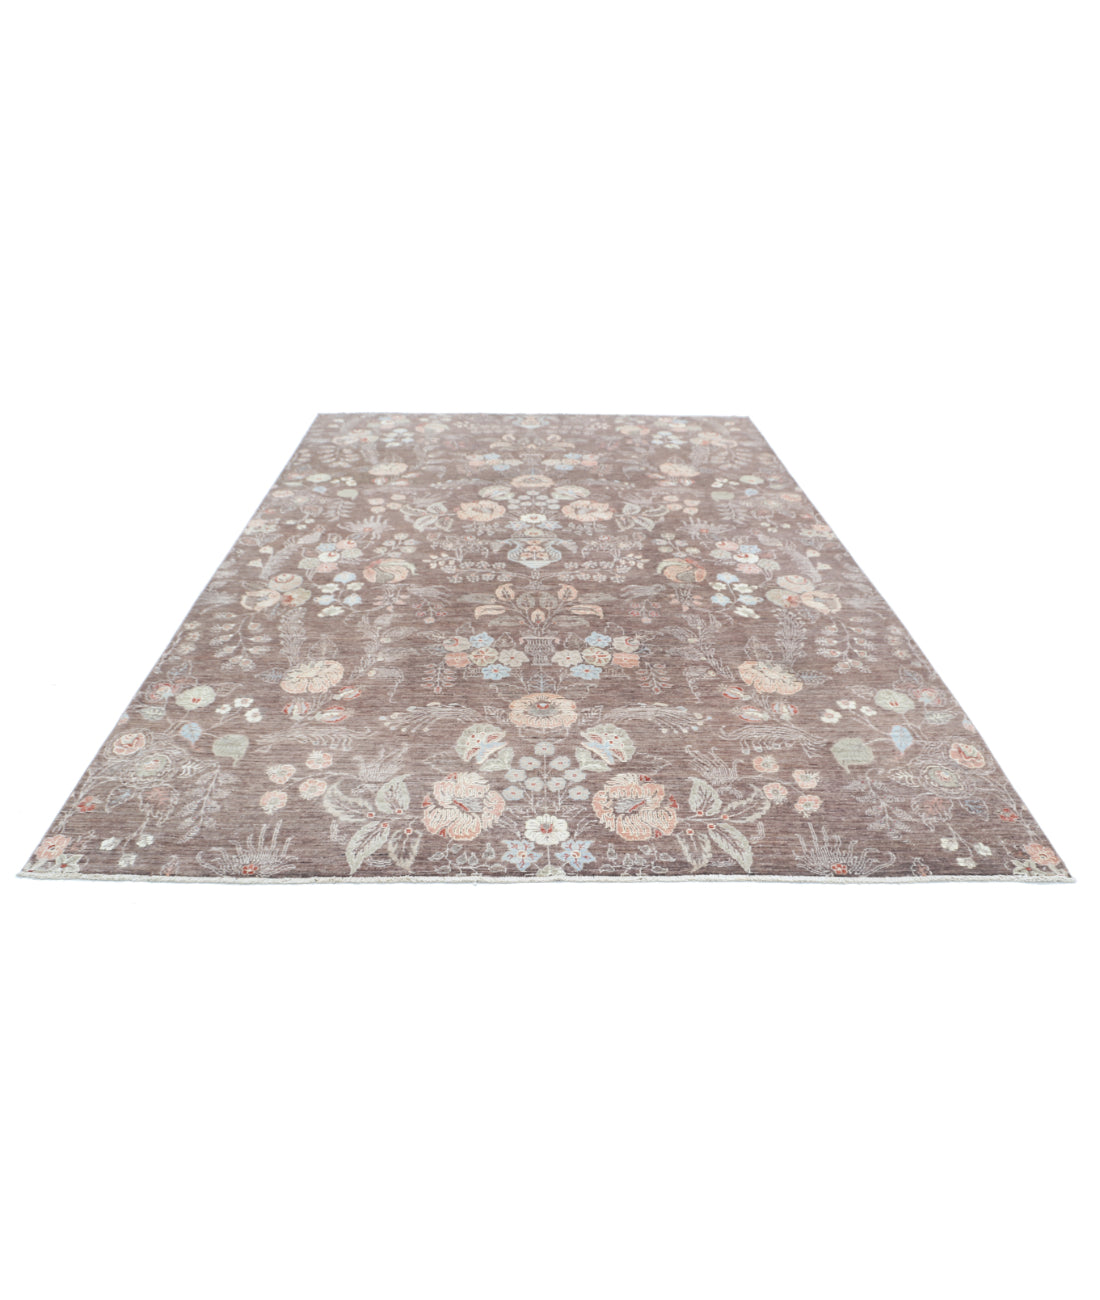 Hand Knotted Artemix Wool Rug - 7'9'' x 10'11'' 7'9'' x 10'11'' (233 X 328) / Brown / Ivory